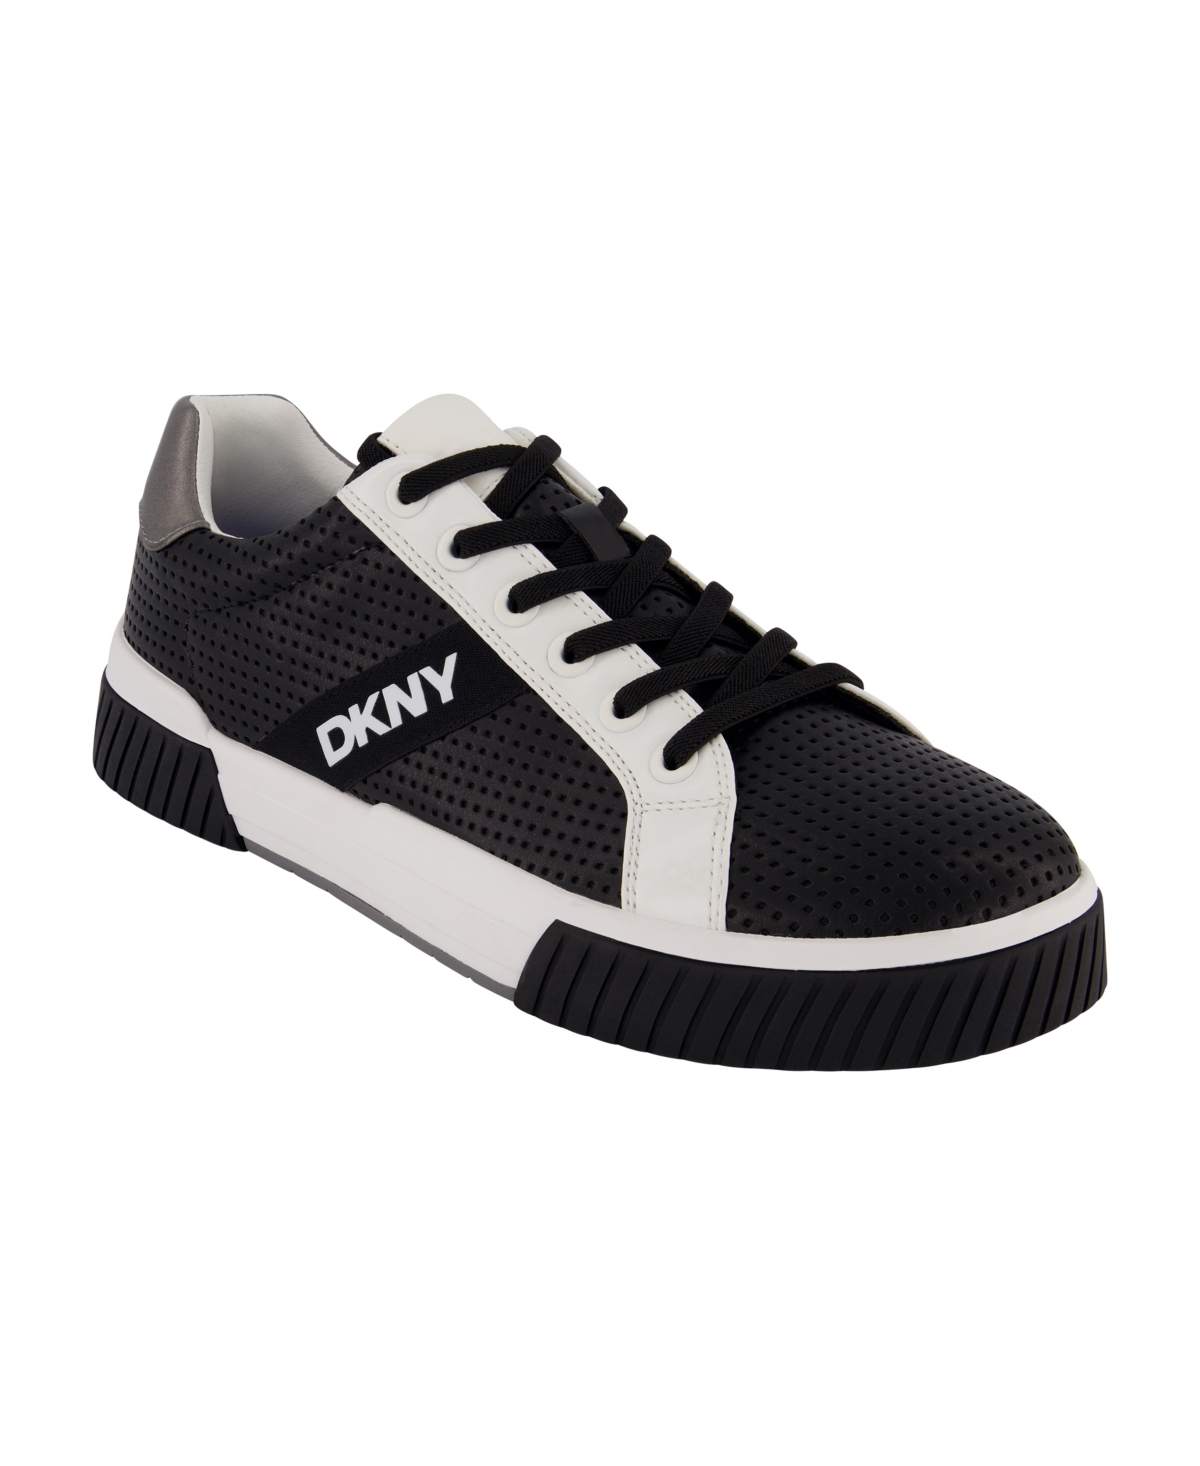 Shop Dkny Men's Perforated Two-tone Branded Sole Racer Toe Sneakers In Black